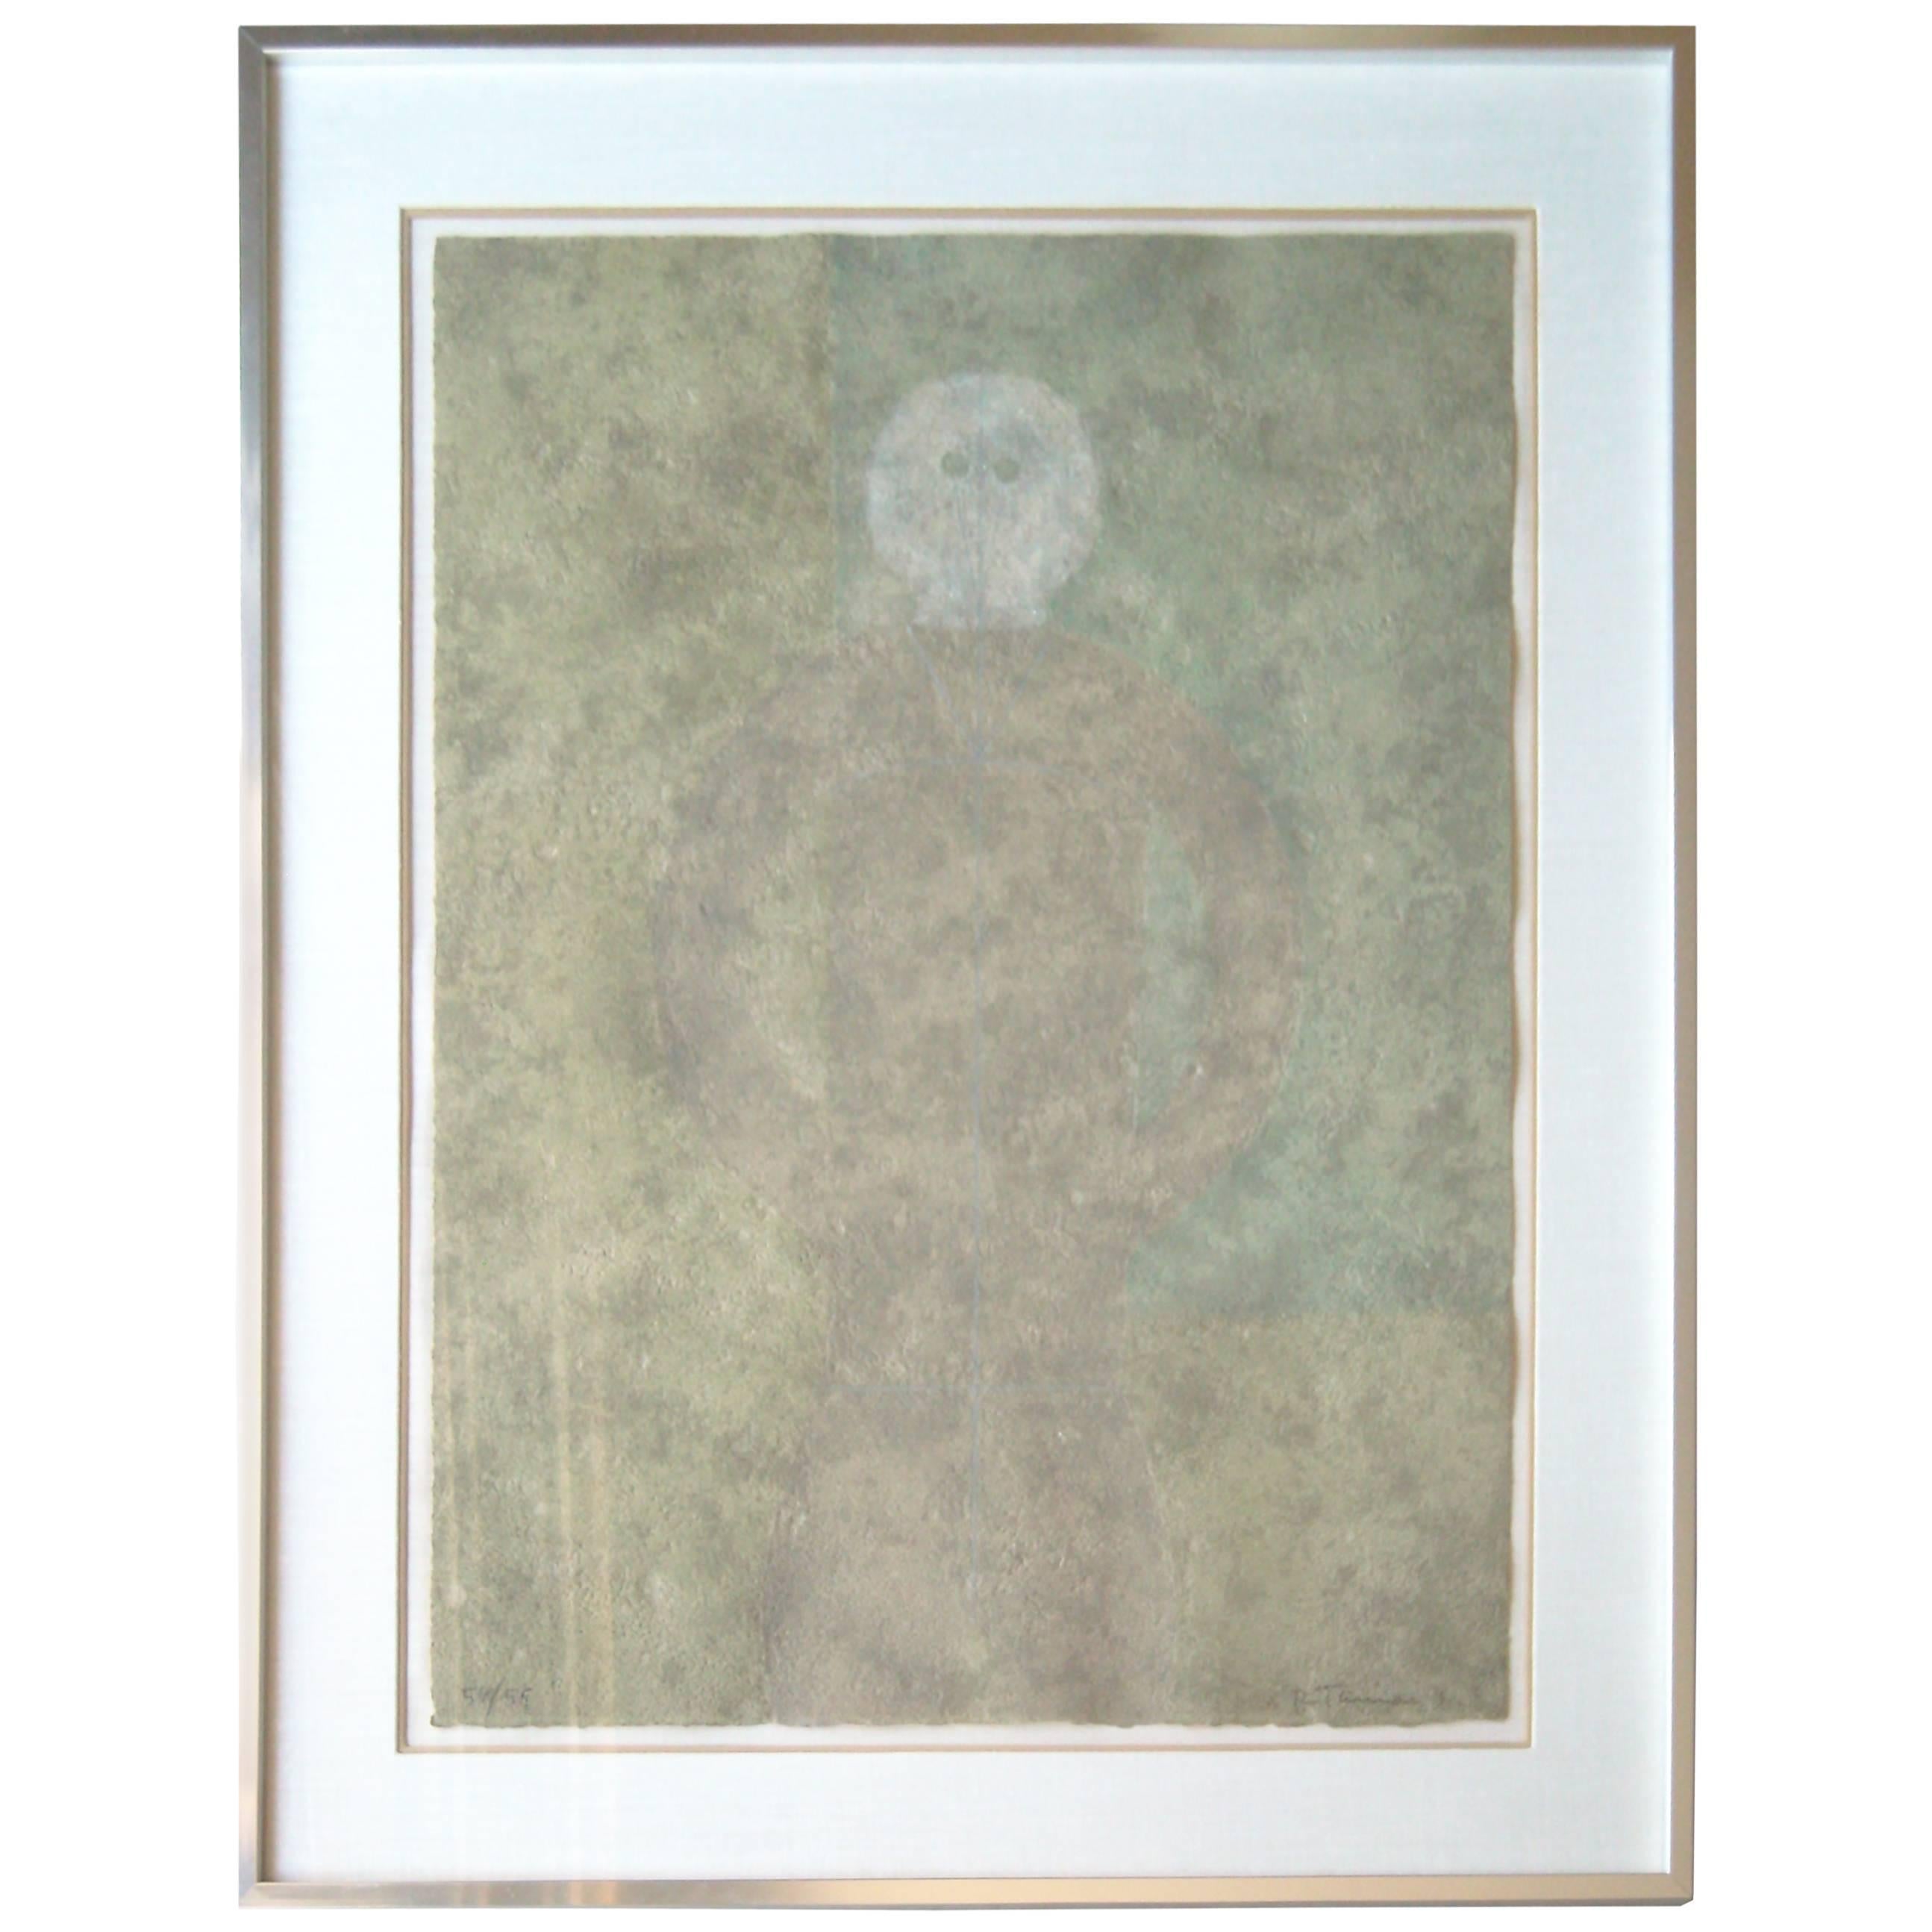 Rufino Tamayo, Personaje en Gris, Lithography in Colors, Signed, Numbered, Framed